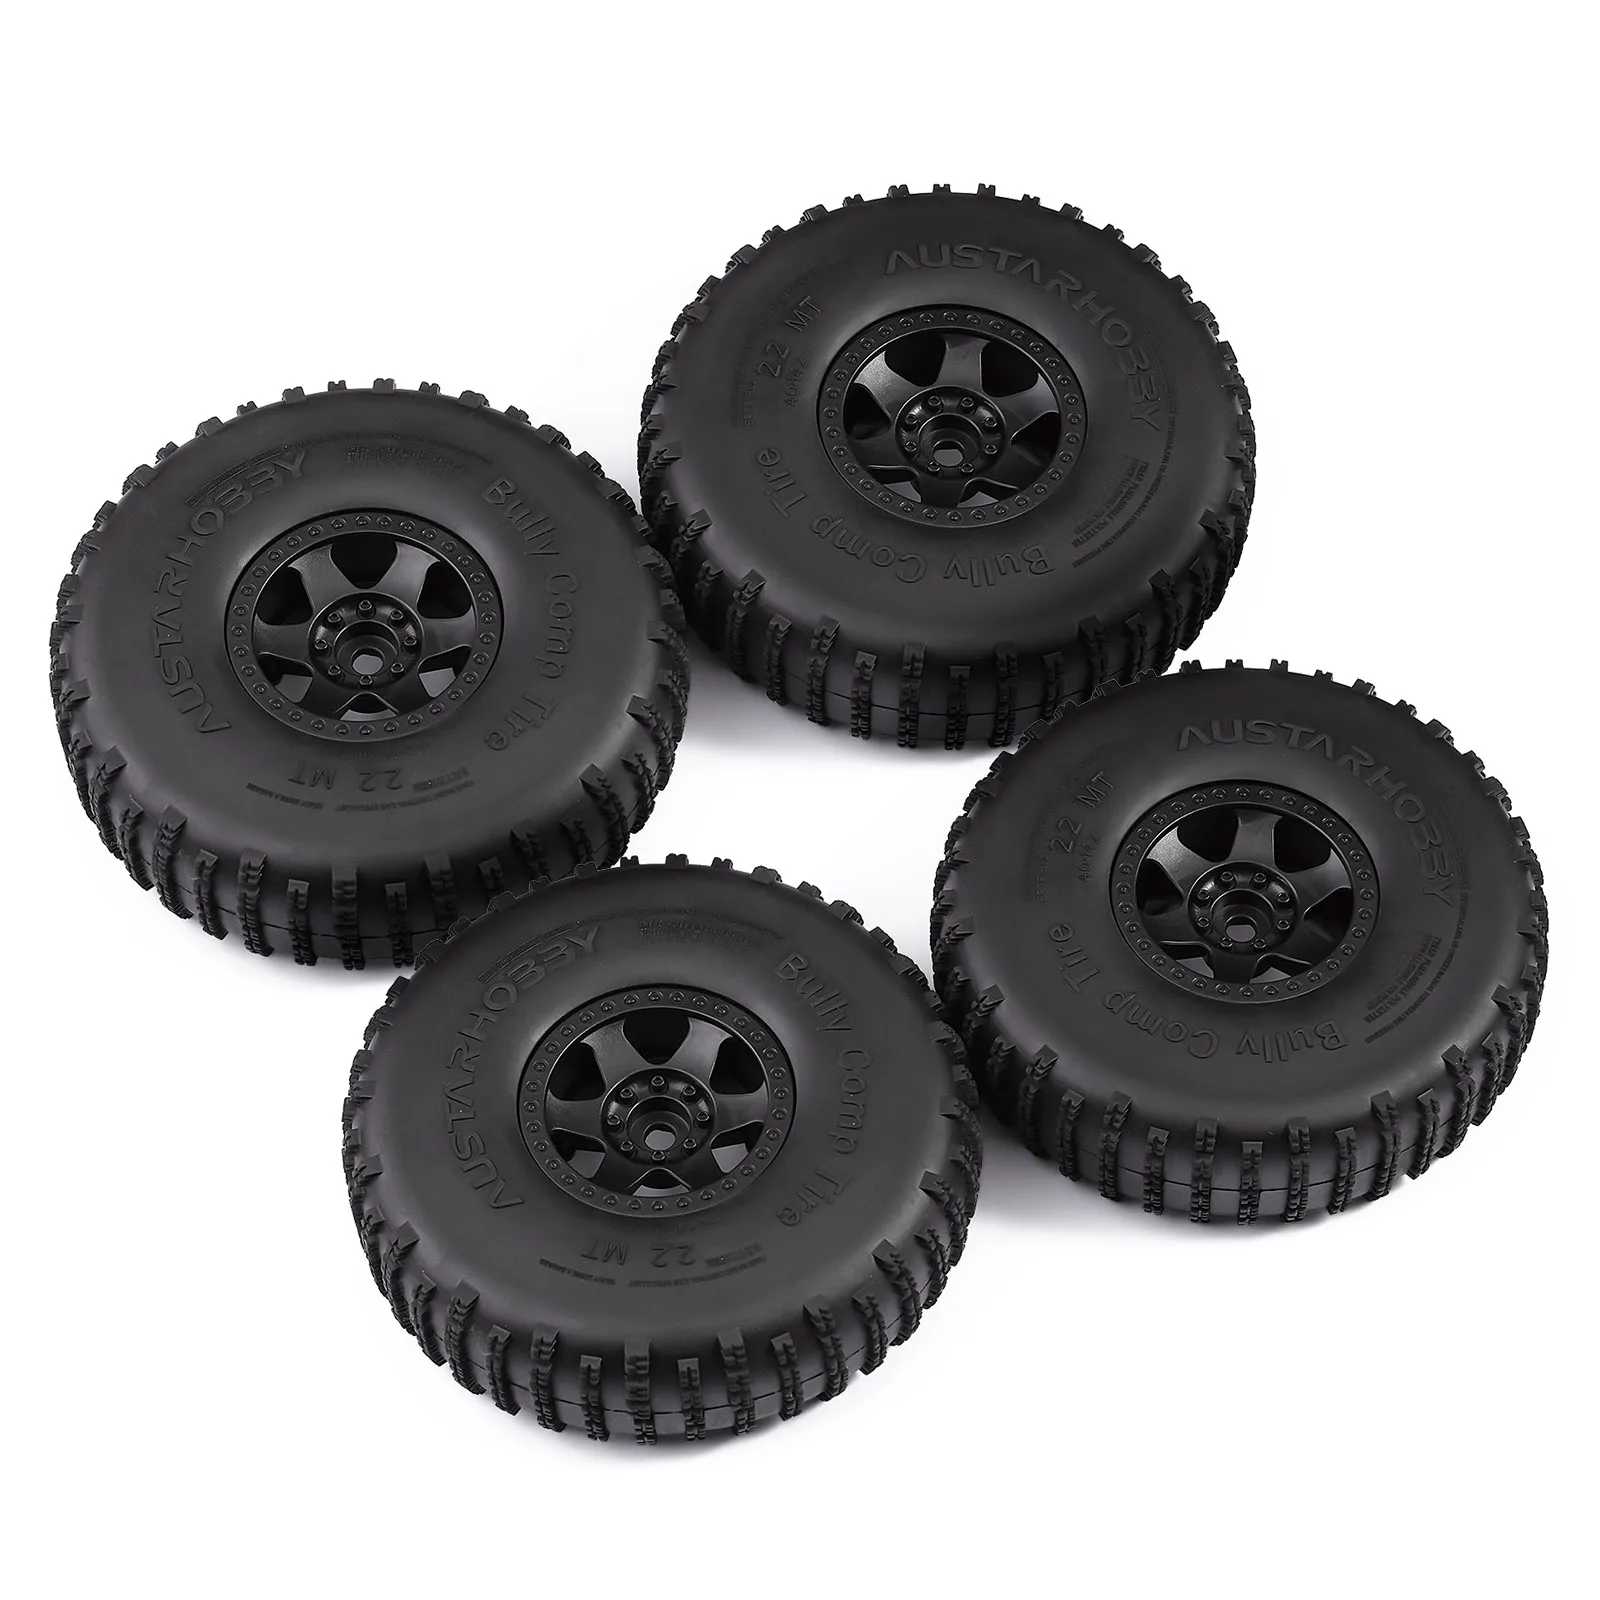 Plastic 2.2" Beadlock Buggy Bully Wheel Rim&Comp Tires for RC Crawler Axial SCX10 Wraith 90018 RR10 Bomber RBX10 Ryft images - 6